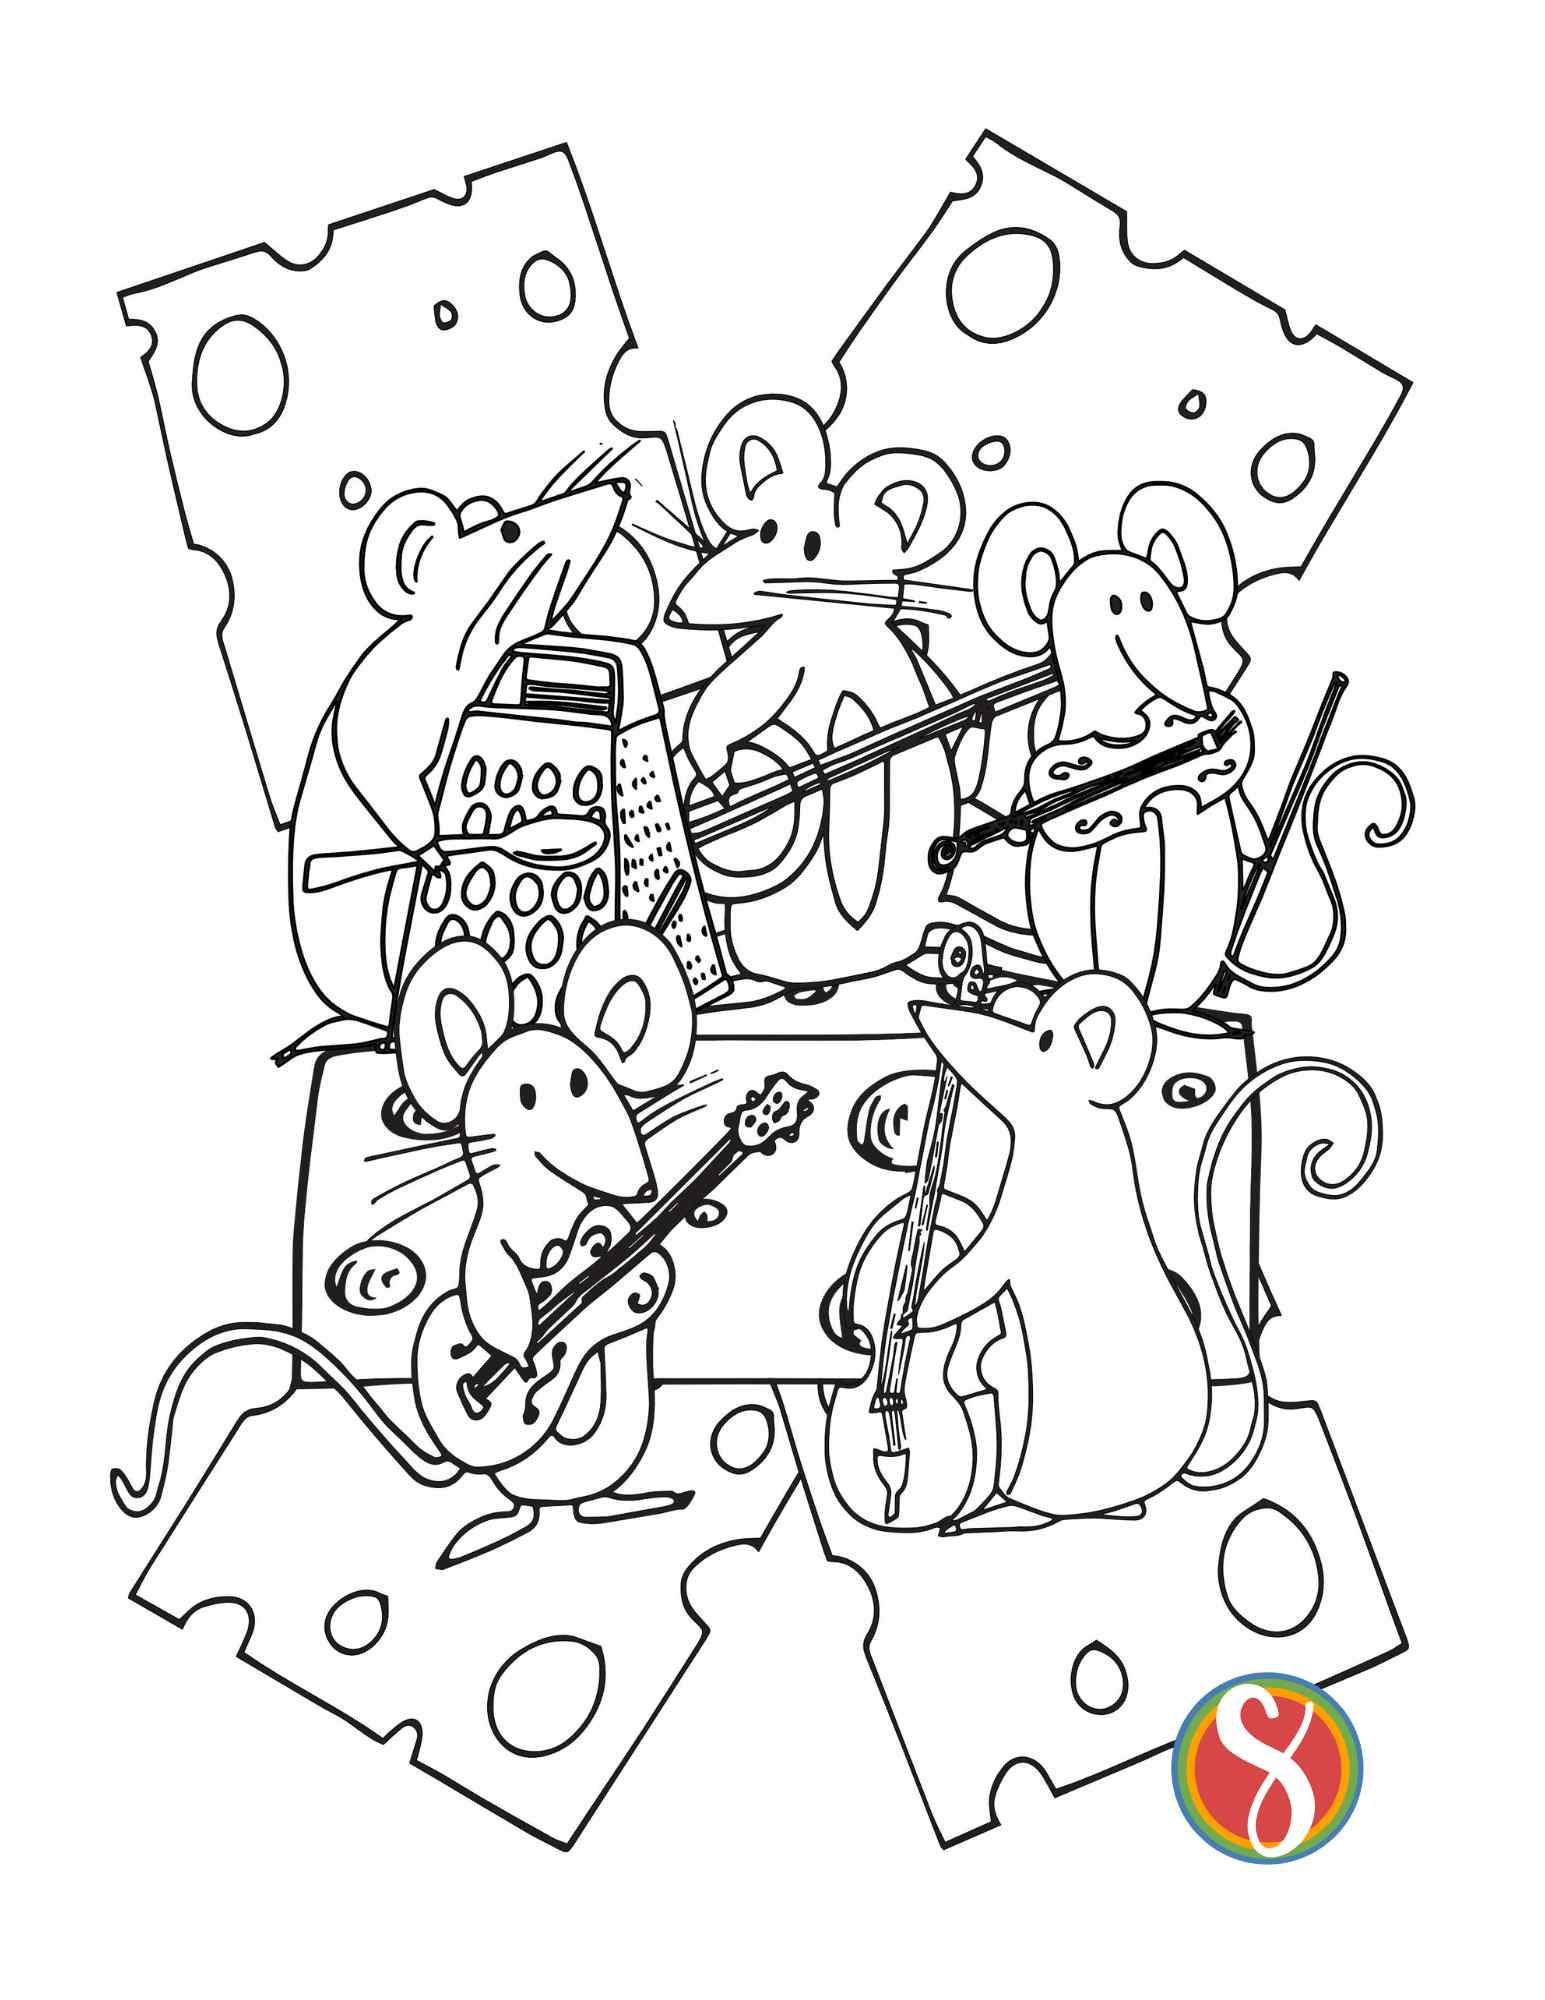 blue grass band of mice coloring page, slices of swiss cheese in the background